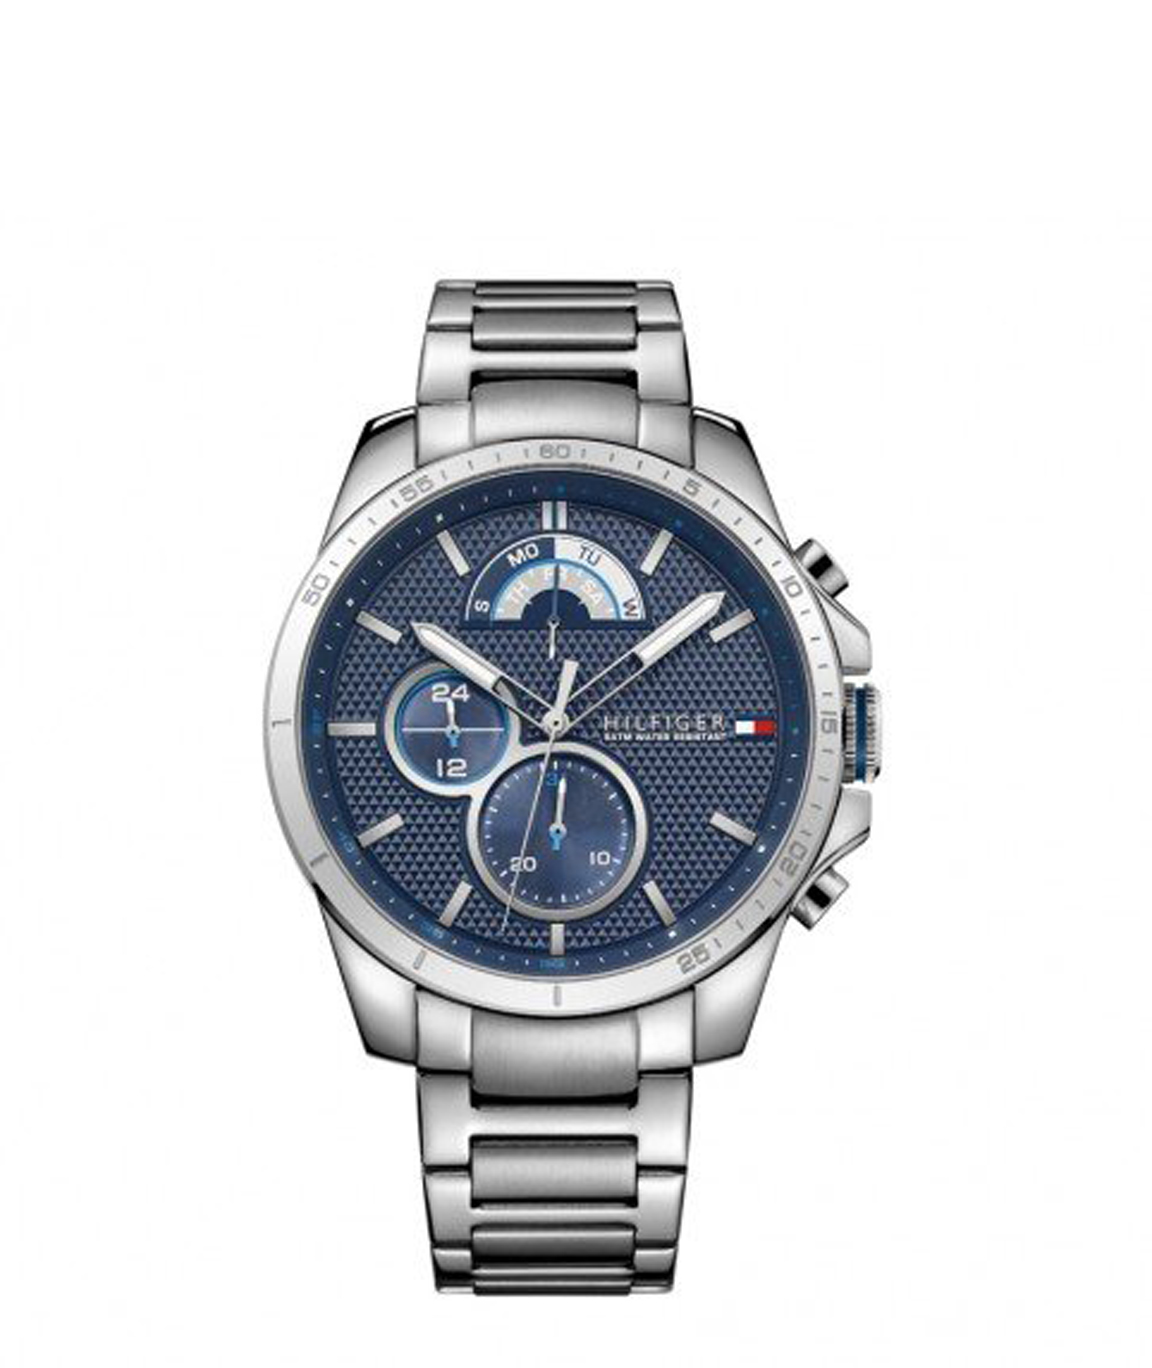 Dress To Impress This Season With Tommy Hilfiger Watches